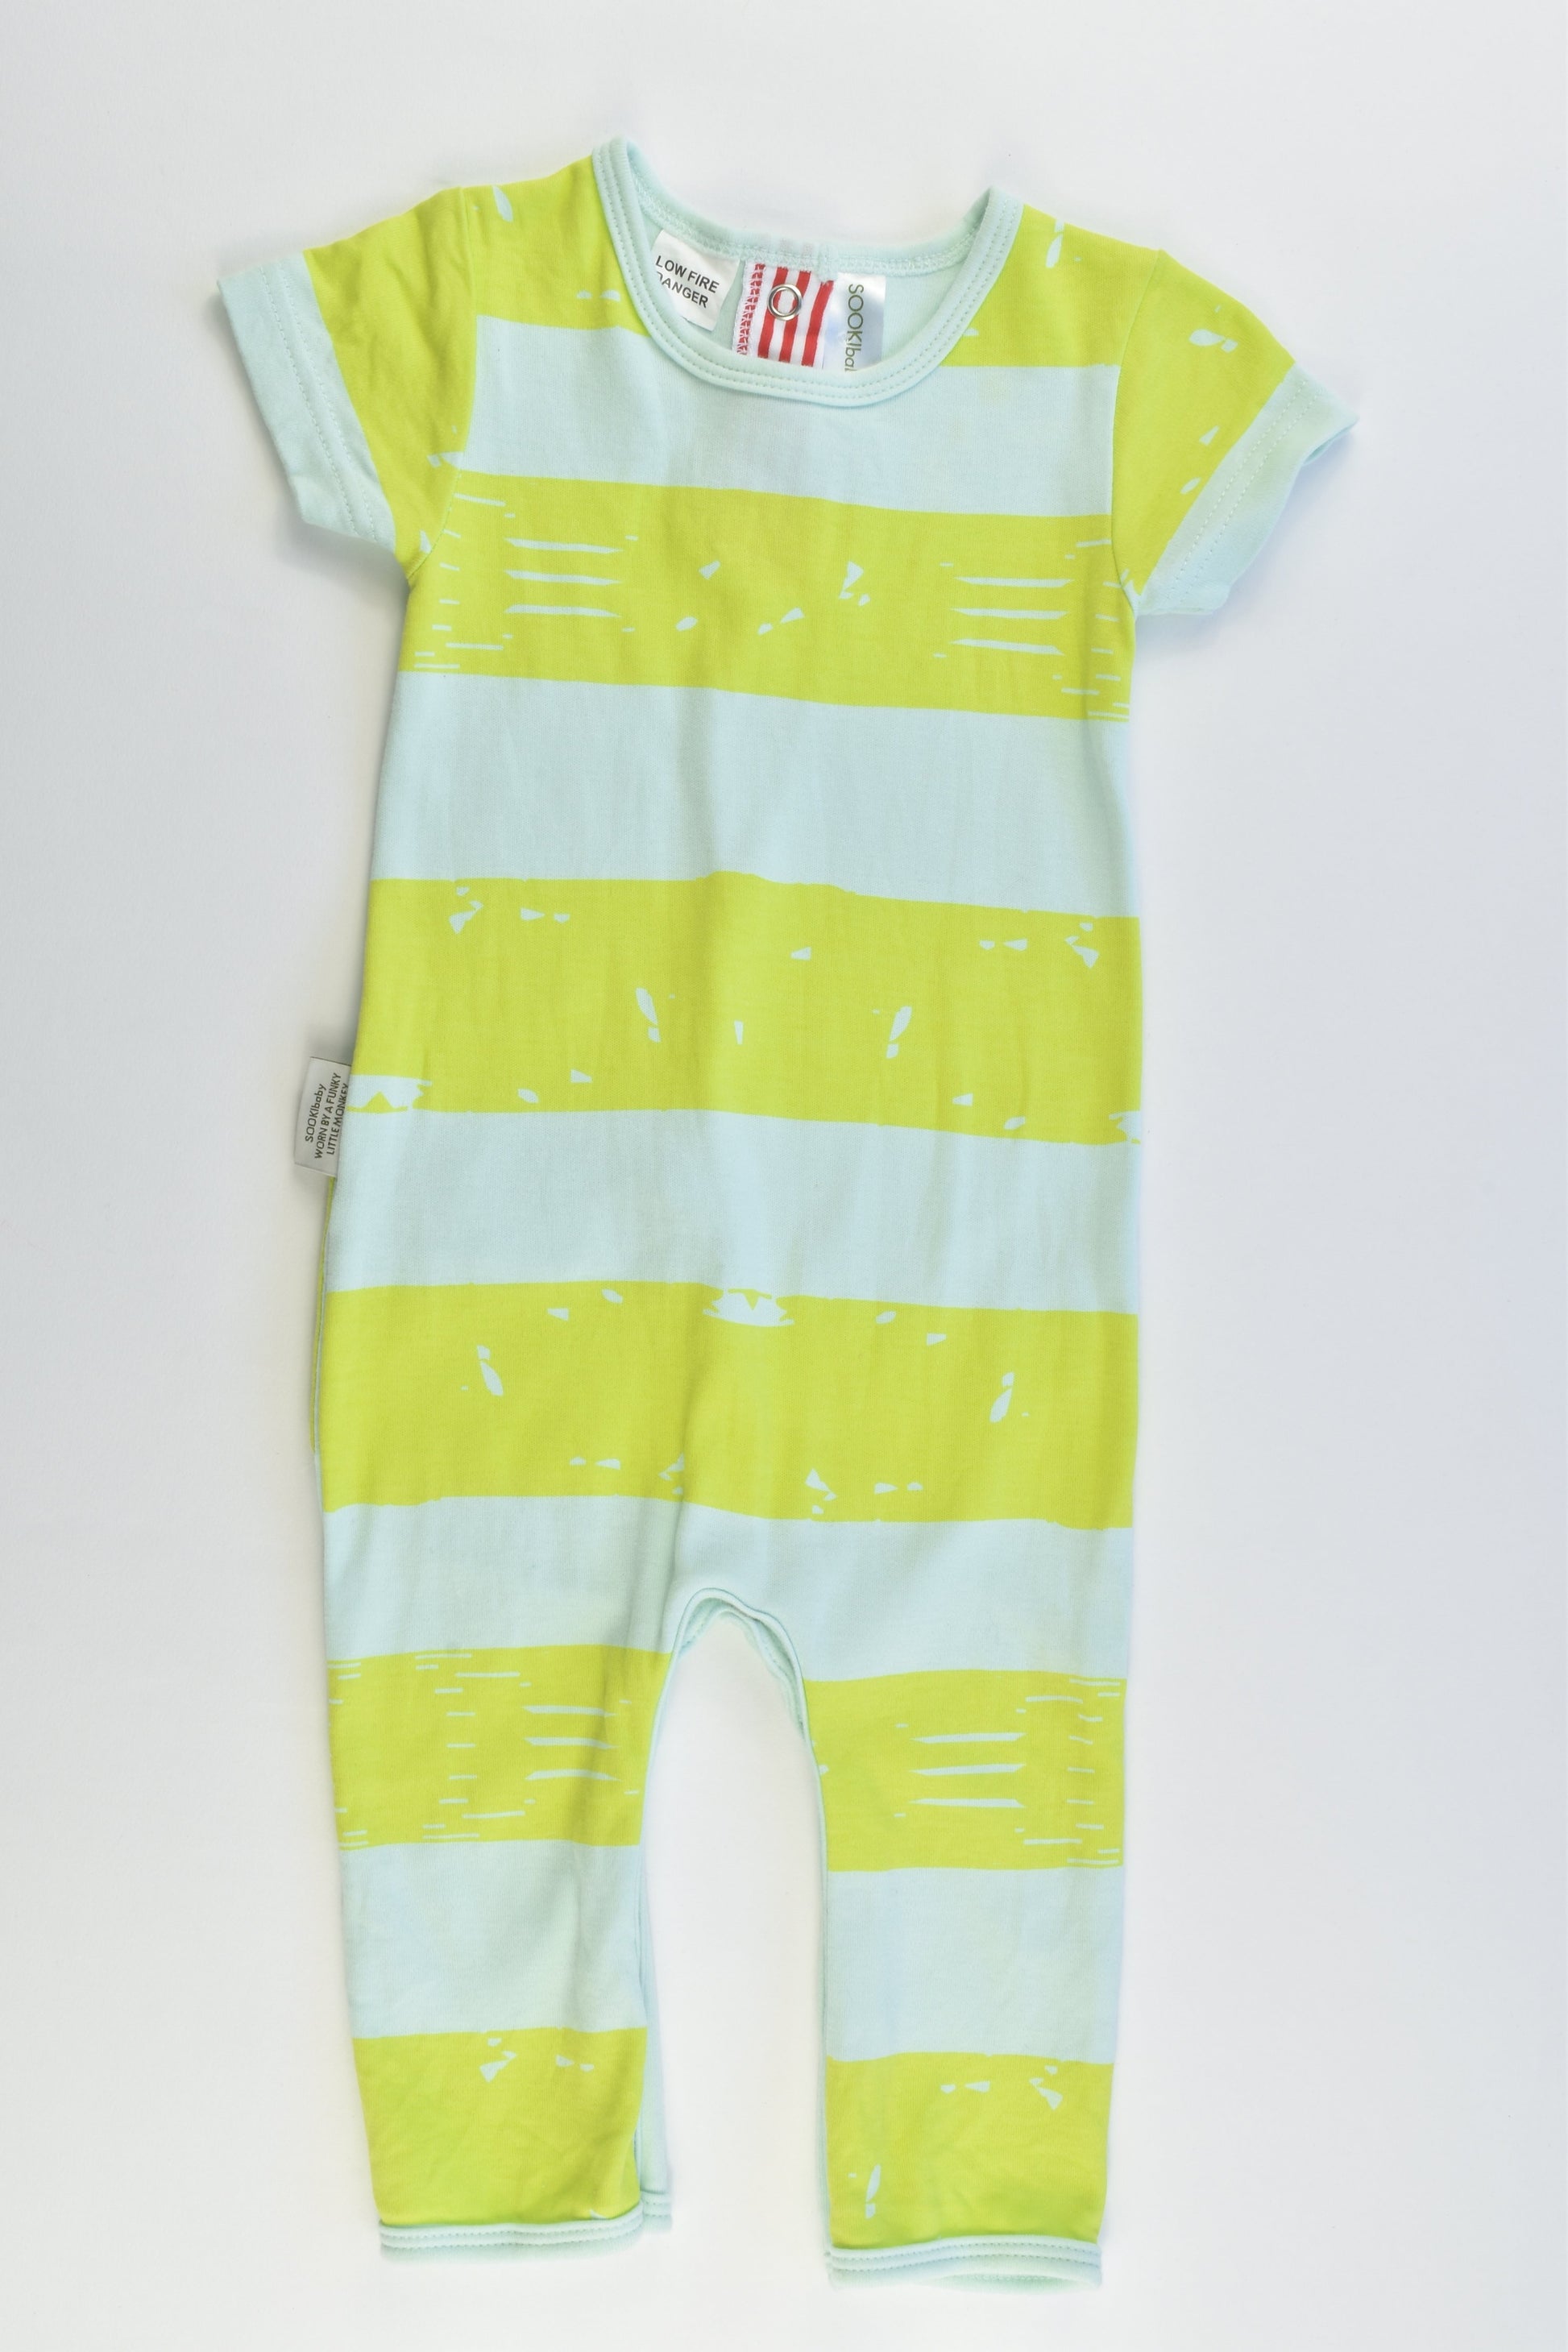 SOOKIbaby Size 00 'Worn By A Funky Little Monkey' Playsuit